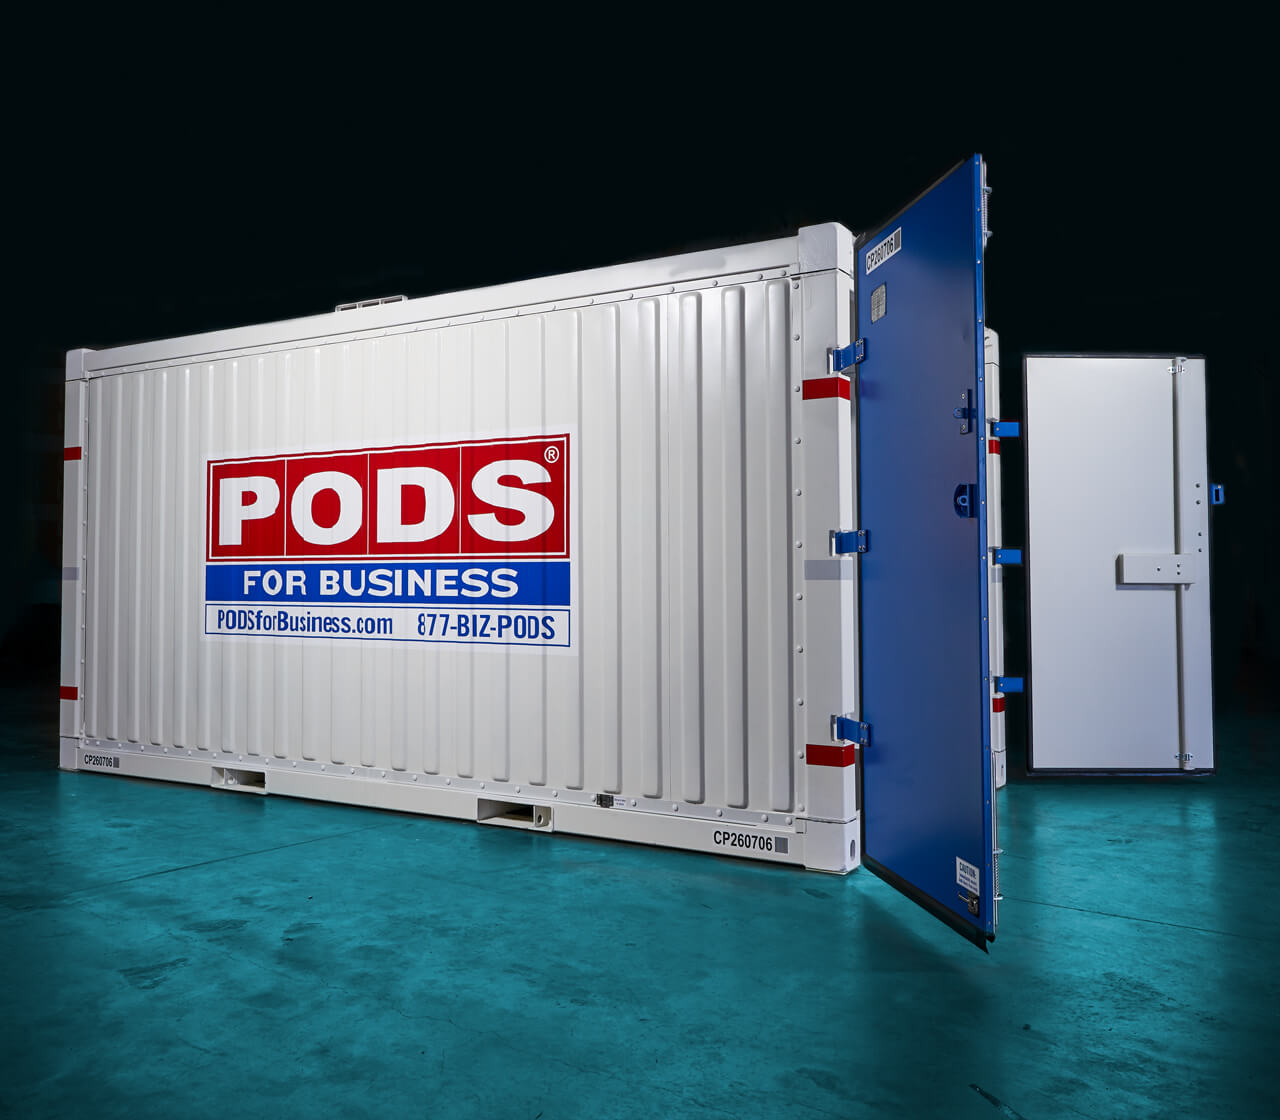 Portable Storage Units & Containers For Rent